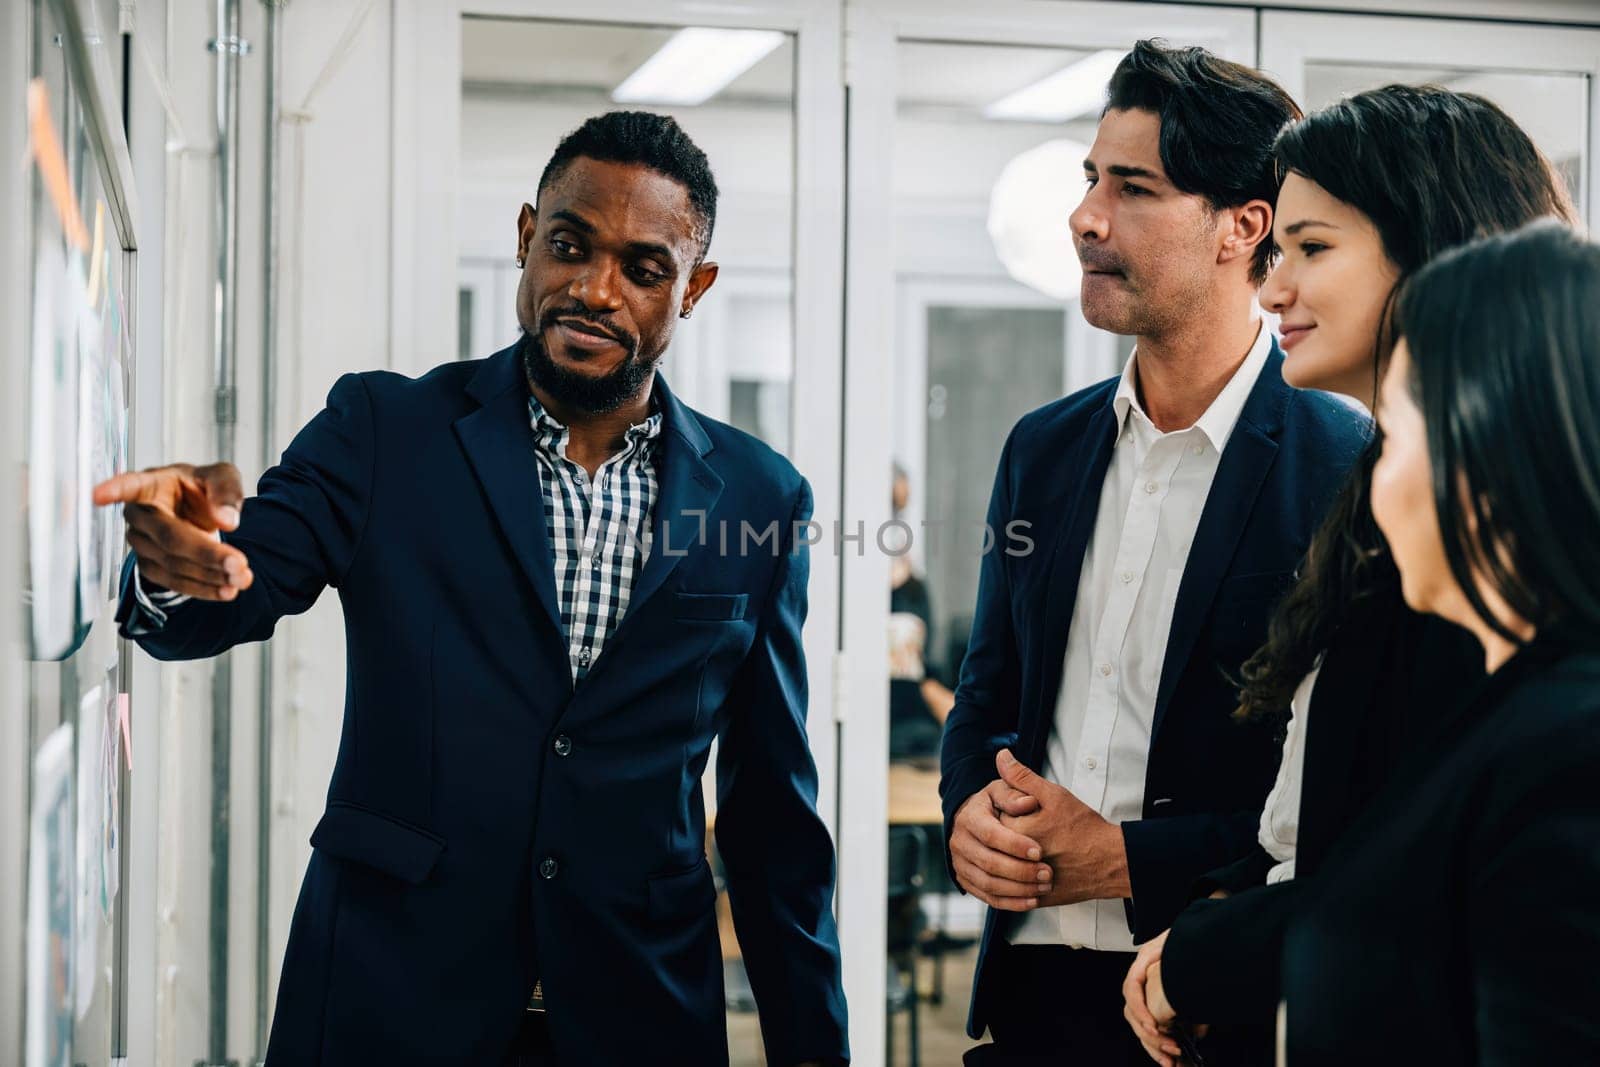 In a dynamic business office setting, colleagues gather around a board. The black businessman leads the discussion, fostering teamwork, brainstorming, and cooperation. team work by Sorapop